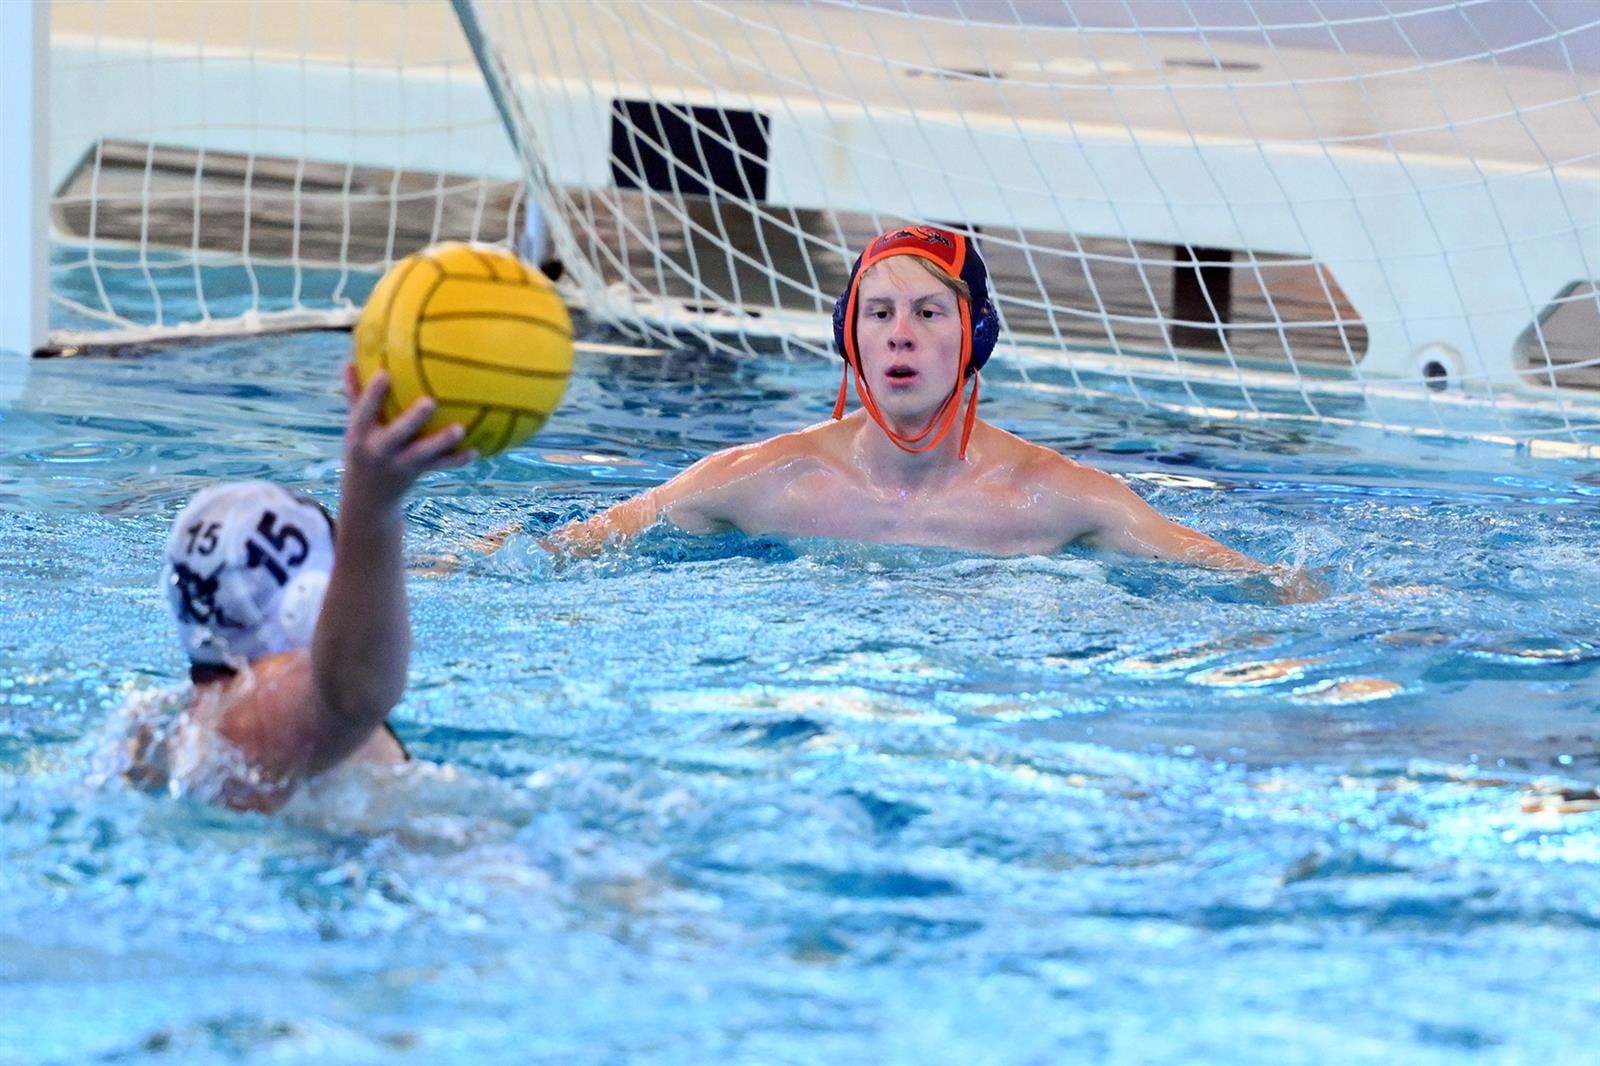 Bridgeland High School senior Austin Steres earned first-team honors on the District 16-6A boys’ water polo team.